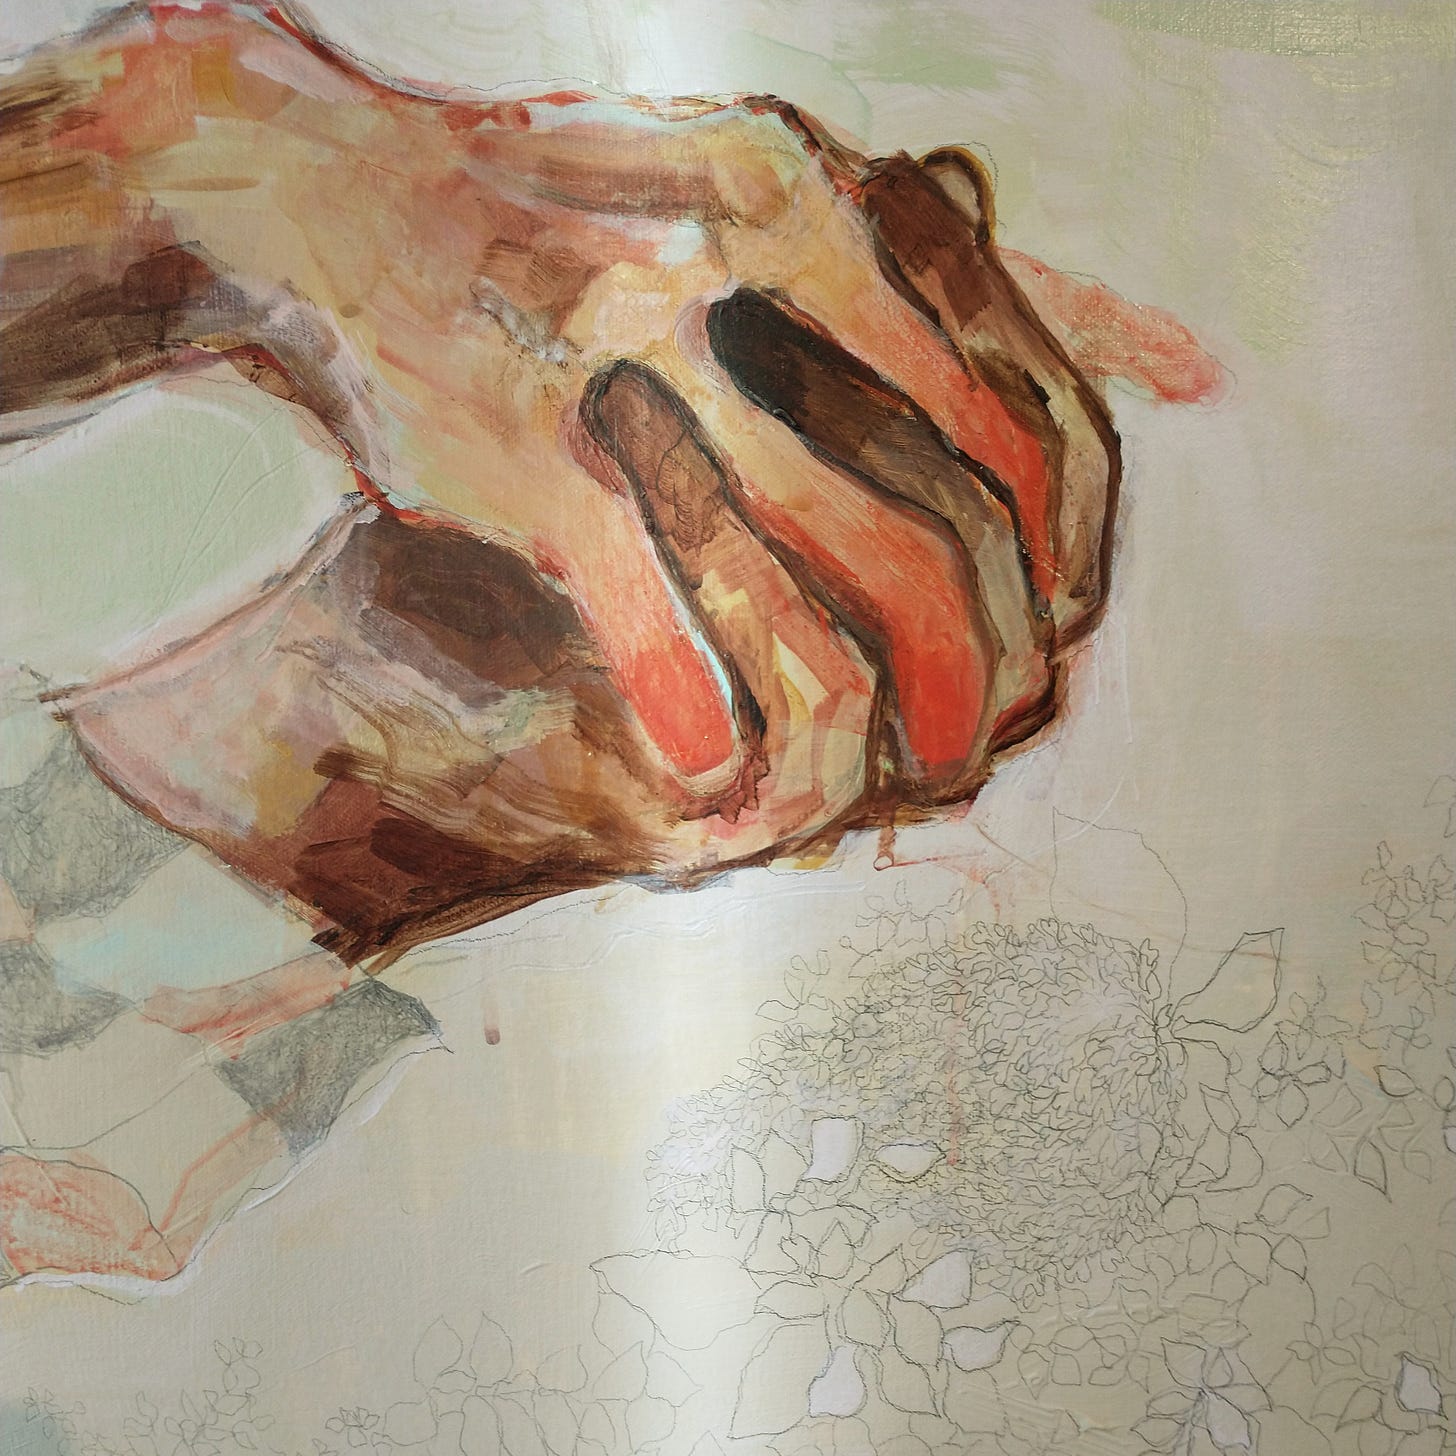 Close-up of two painted hands holding each other. Style is very gritty but controlled. There's a repetitive leaf pattern in graphite on the bottom right corner.